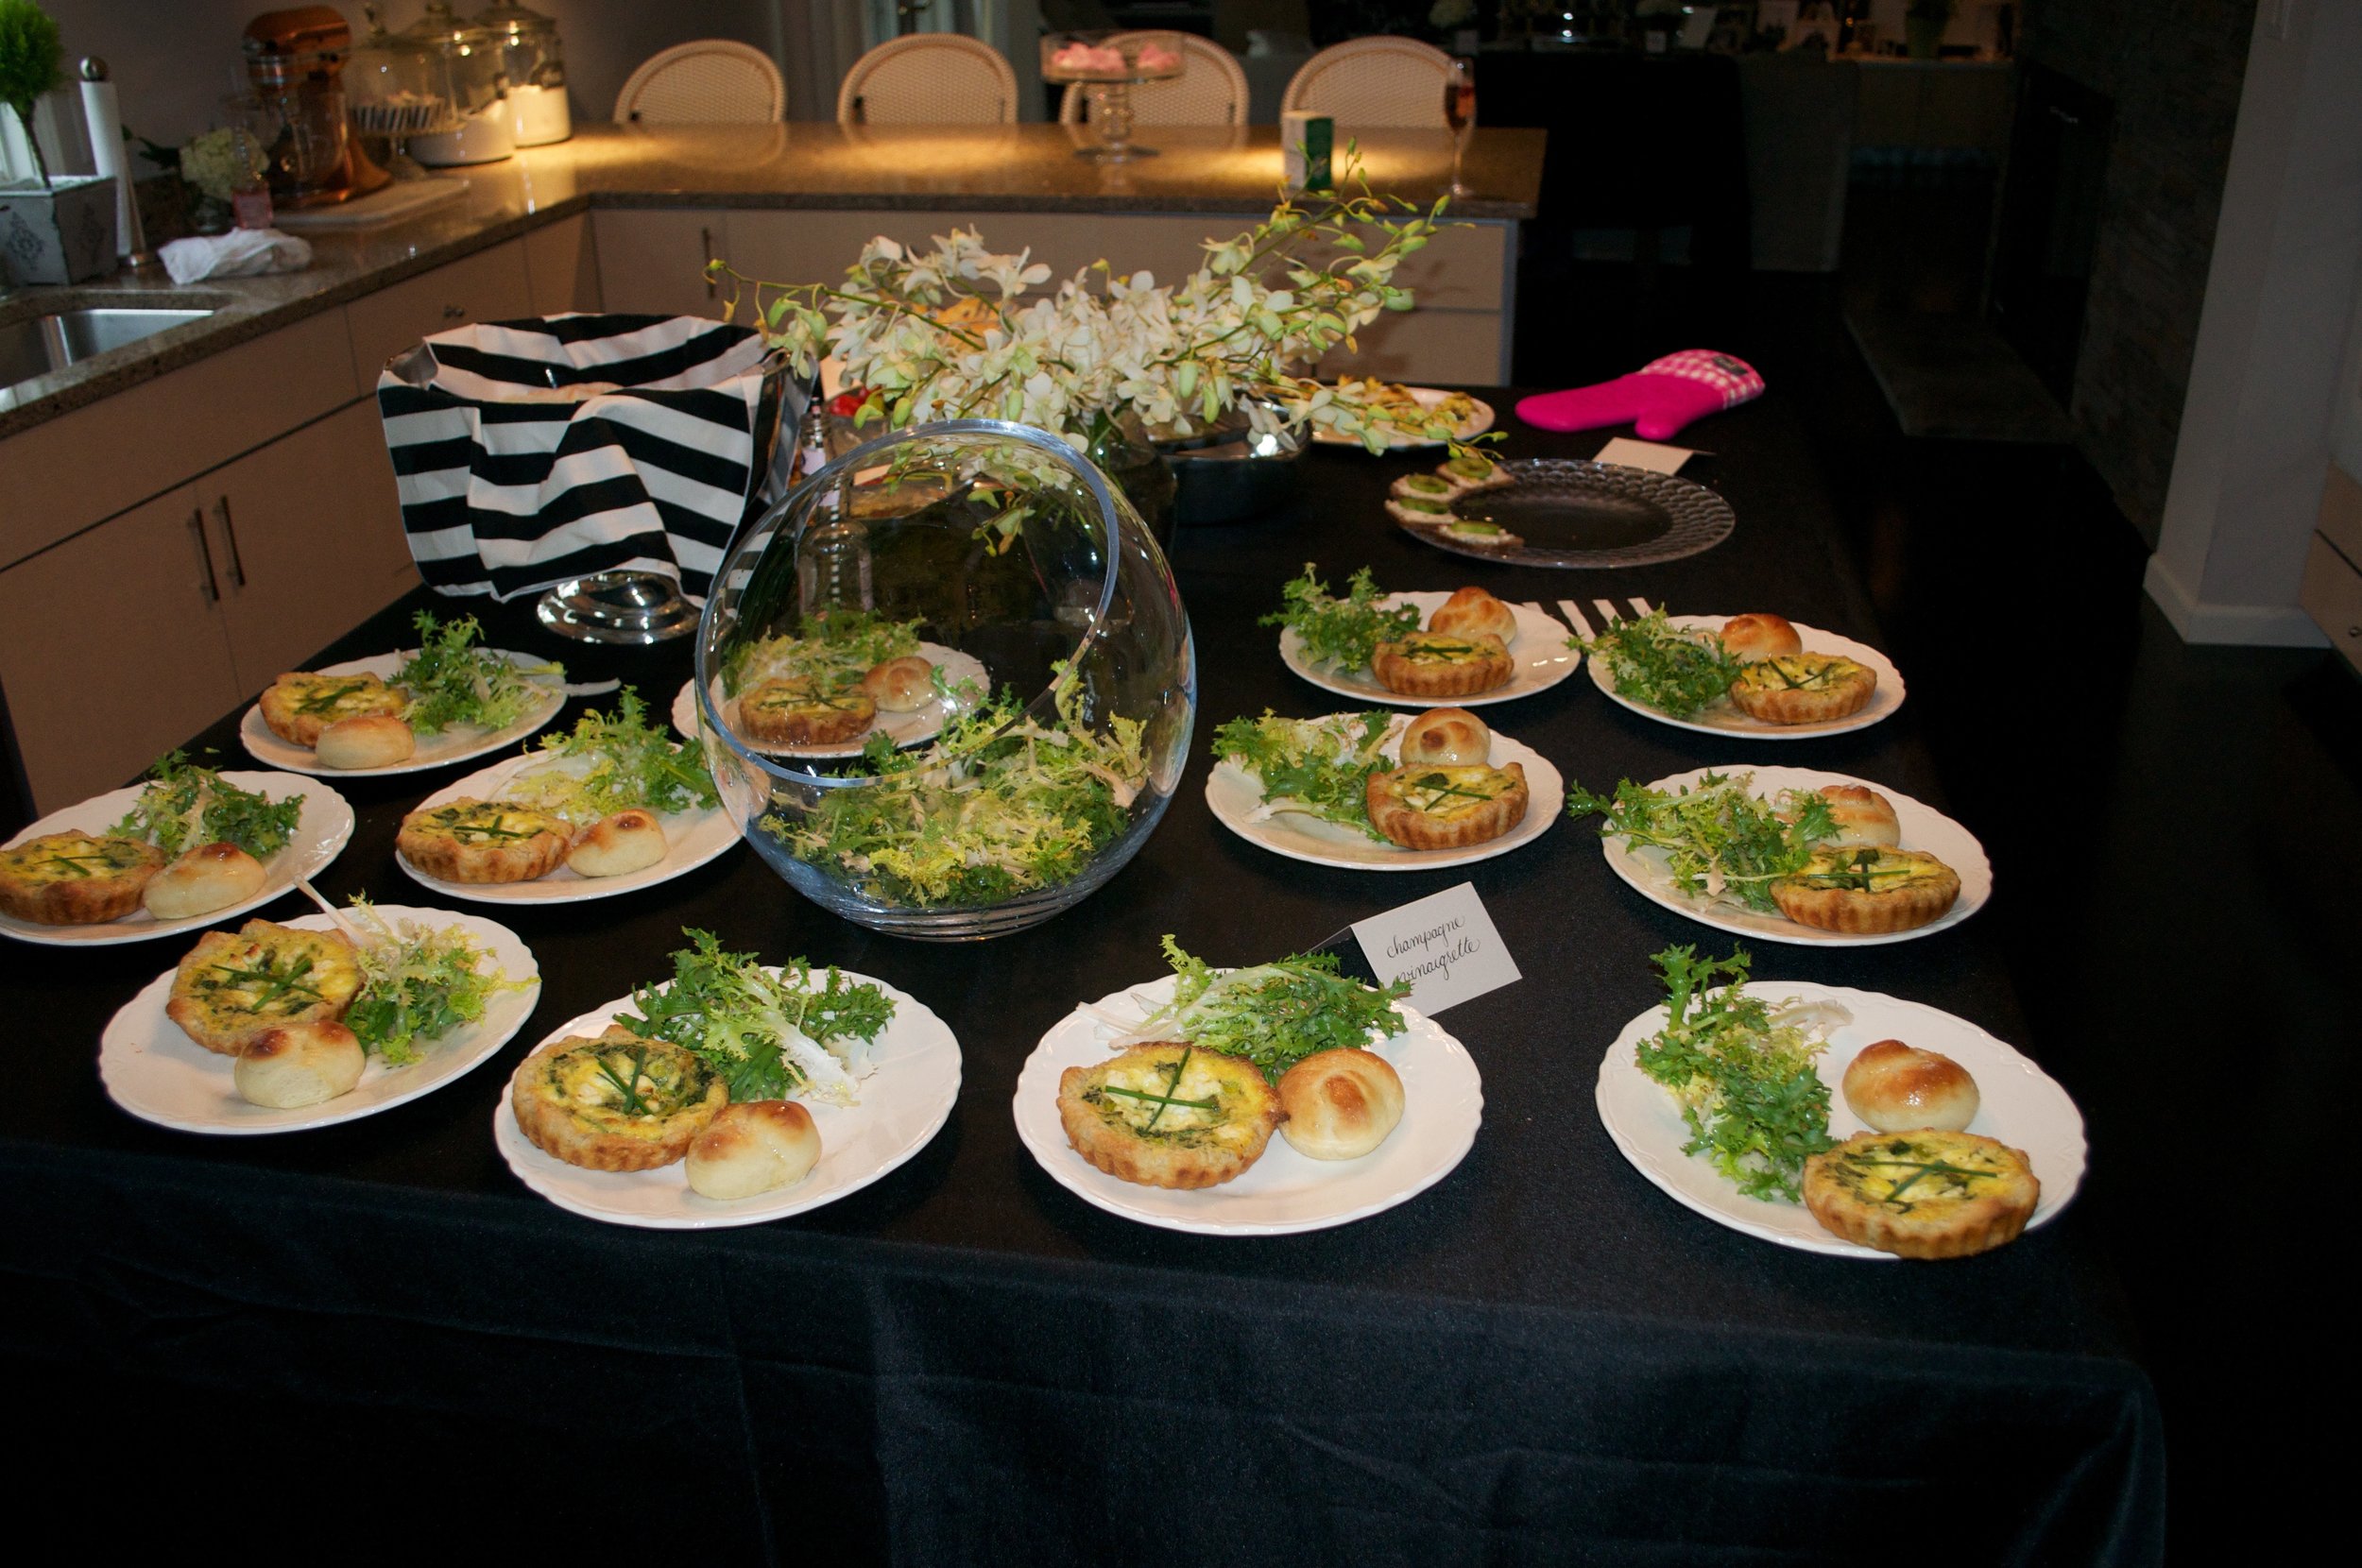 Mini gruyère quiches and garlic knot rolls with frisée salad and champagne vinaigrette